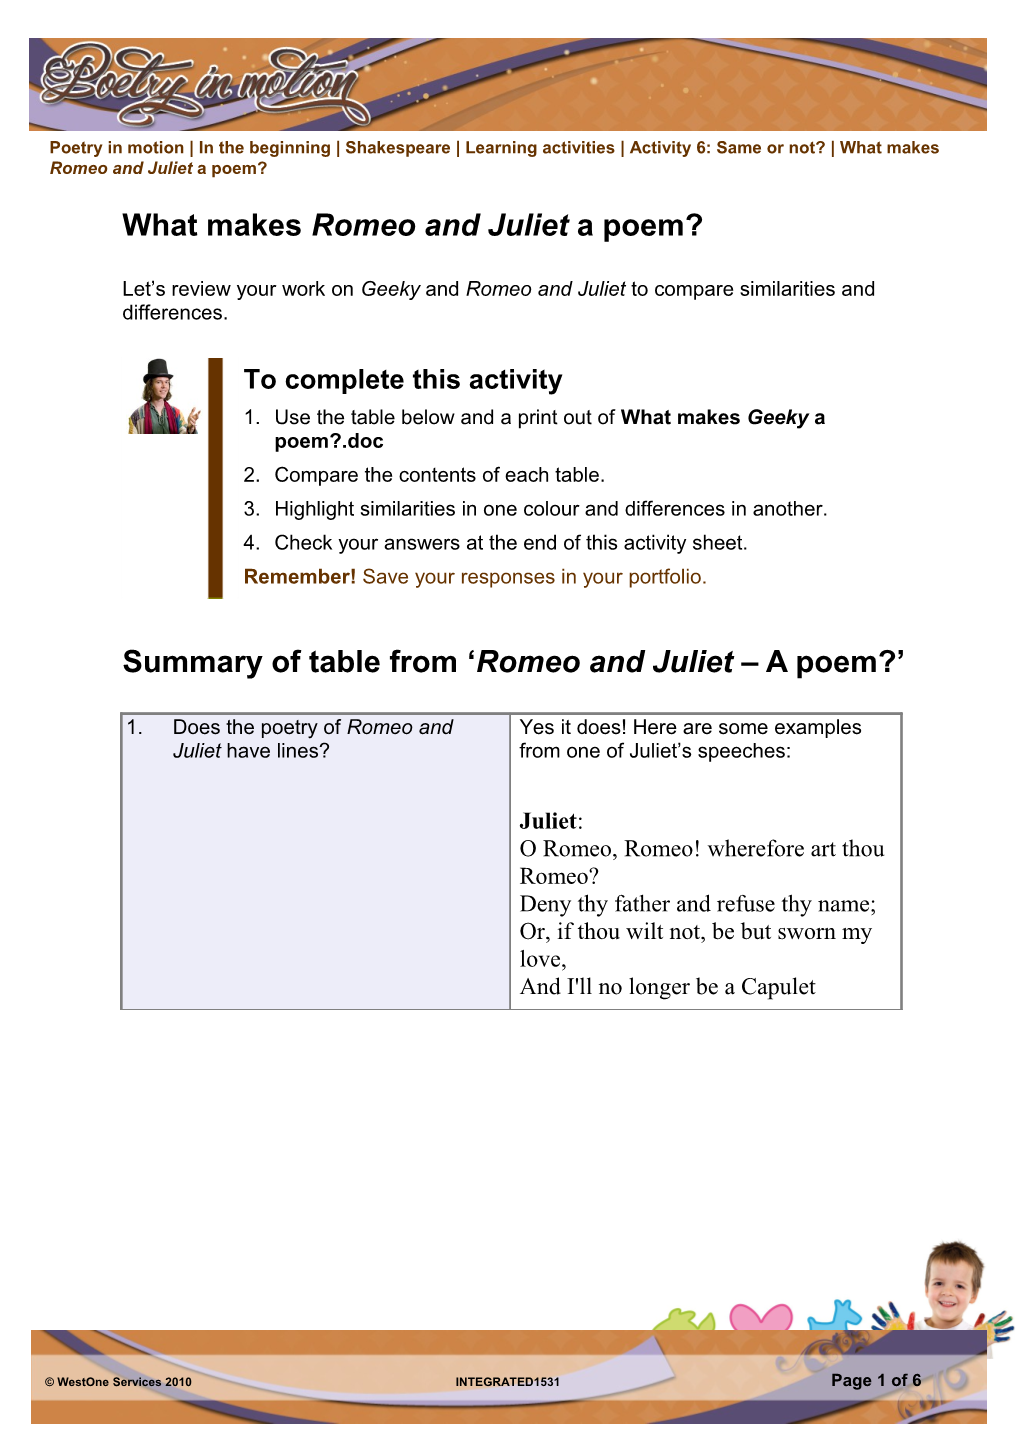 What Makes Romeo and Juliet a Poem?